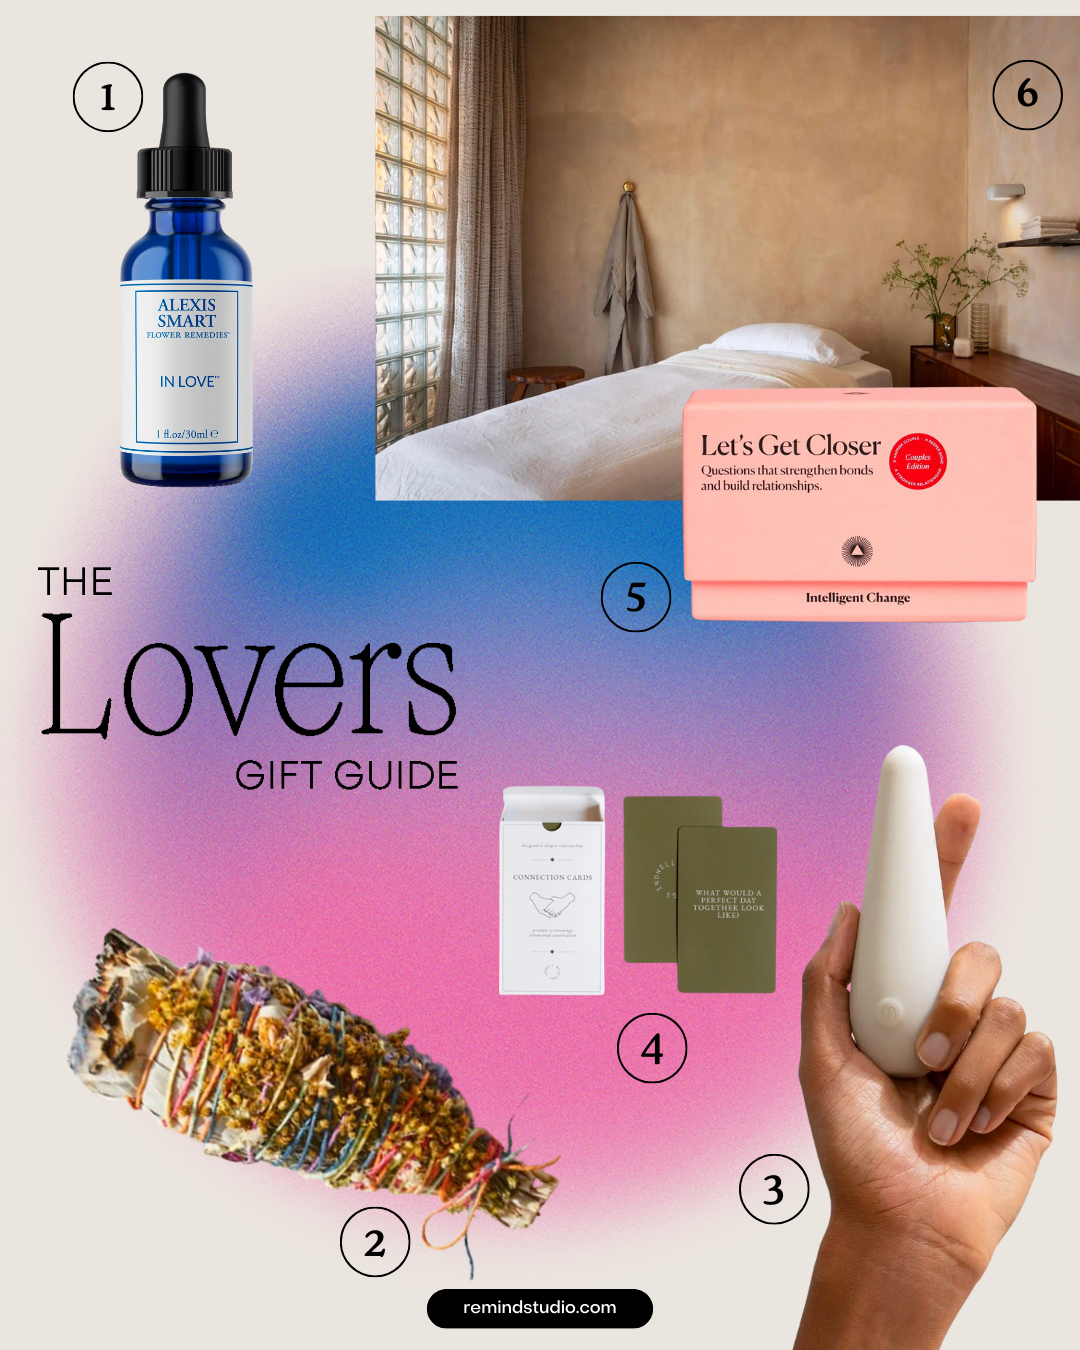 The Lovers Gift Guide